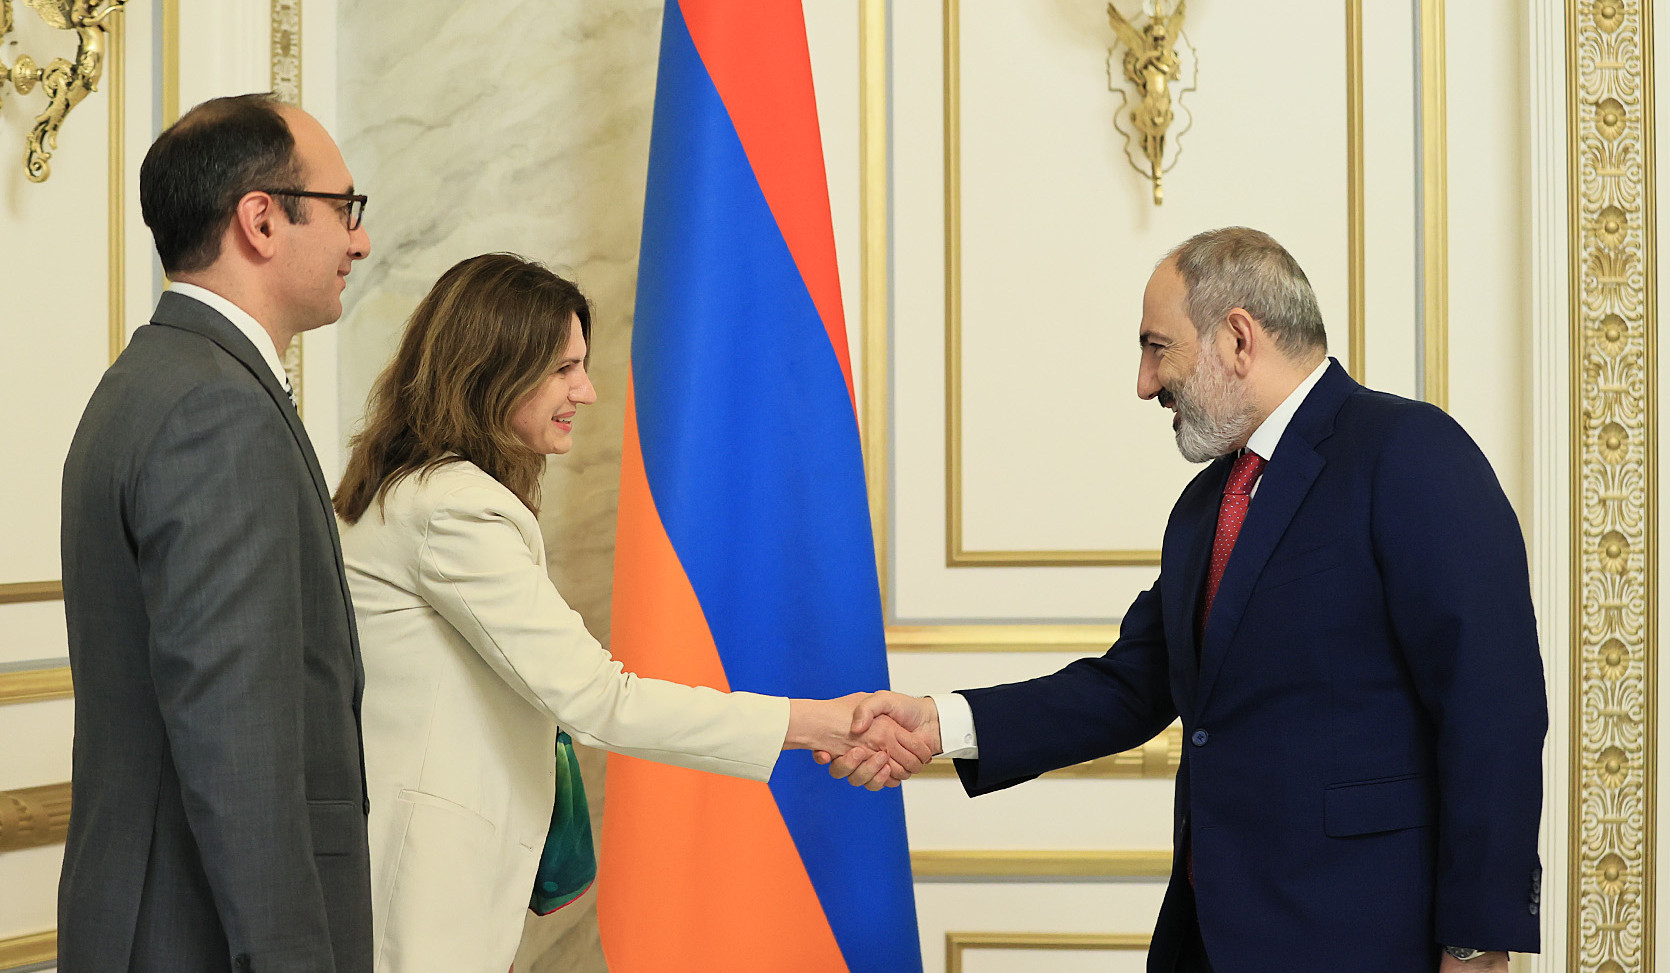 IMF to continue contributing to economic stability and development in Armenia with new programs